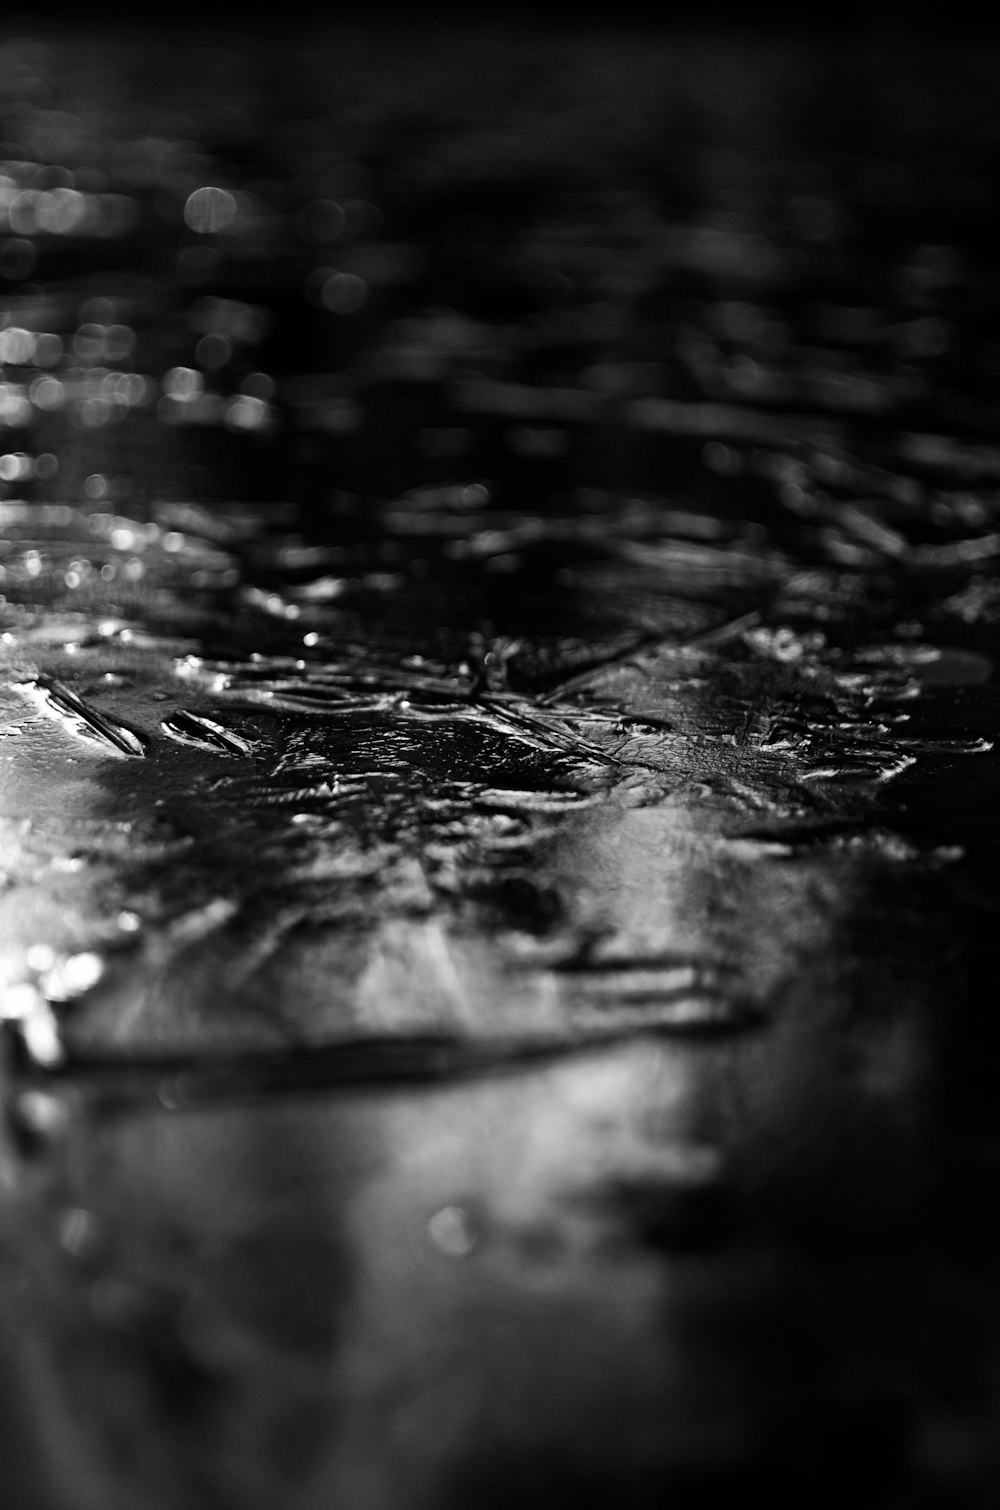 water droplets on wooden surface